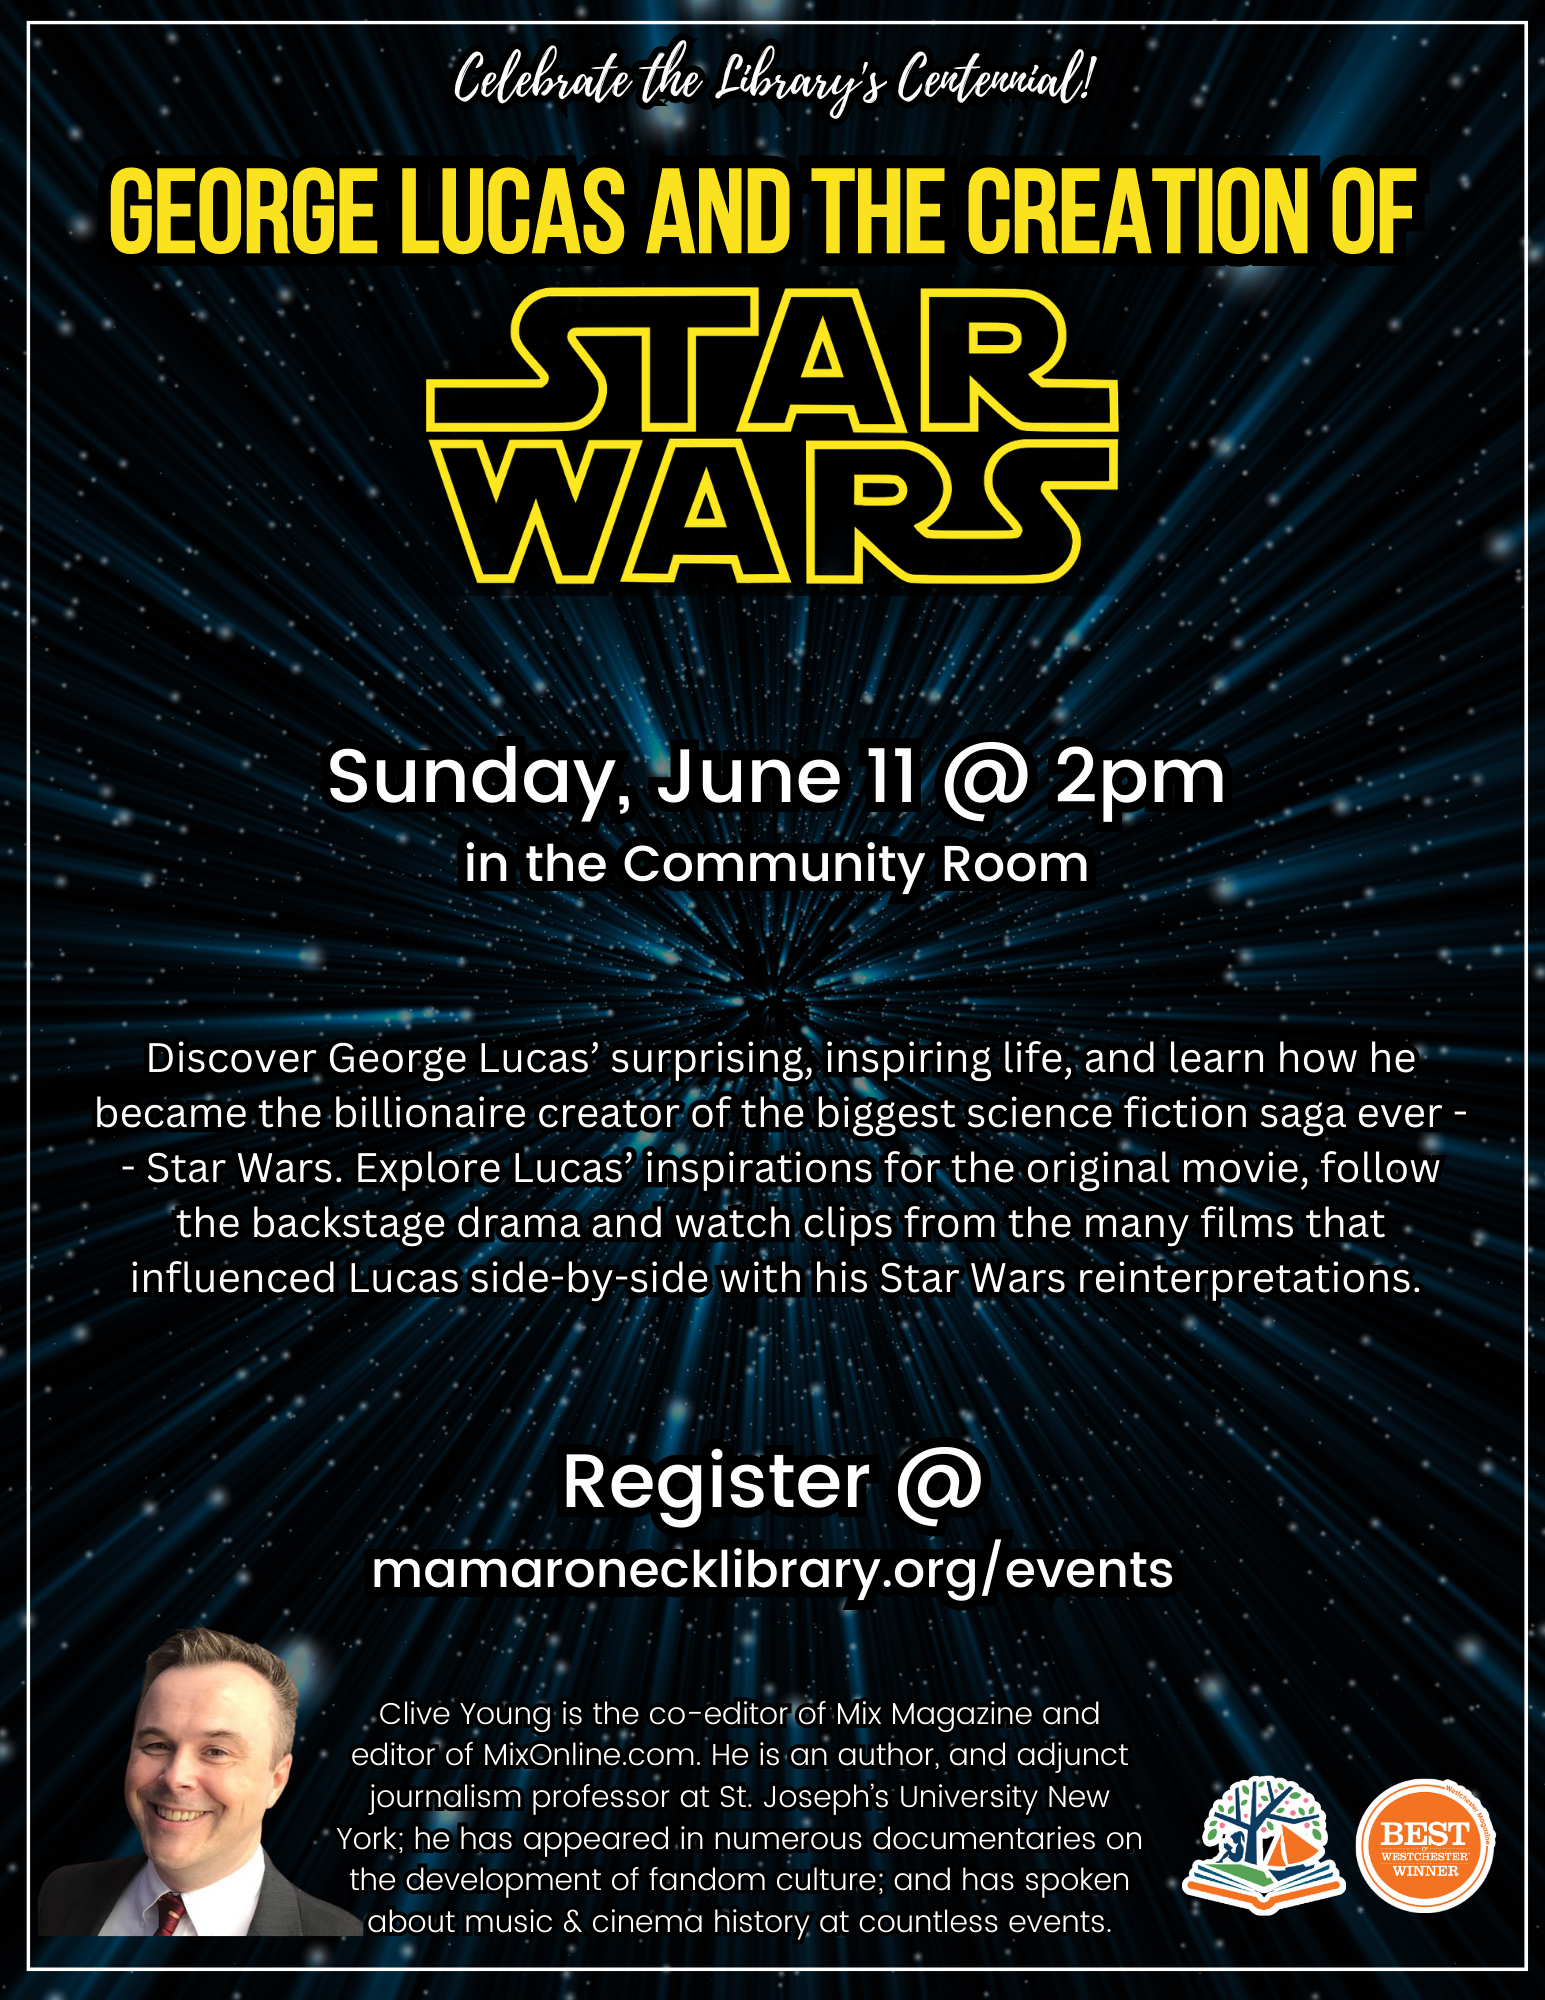 6/11 @ 2pm in the community room - George Lucas and the creation of Star Wars